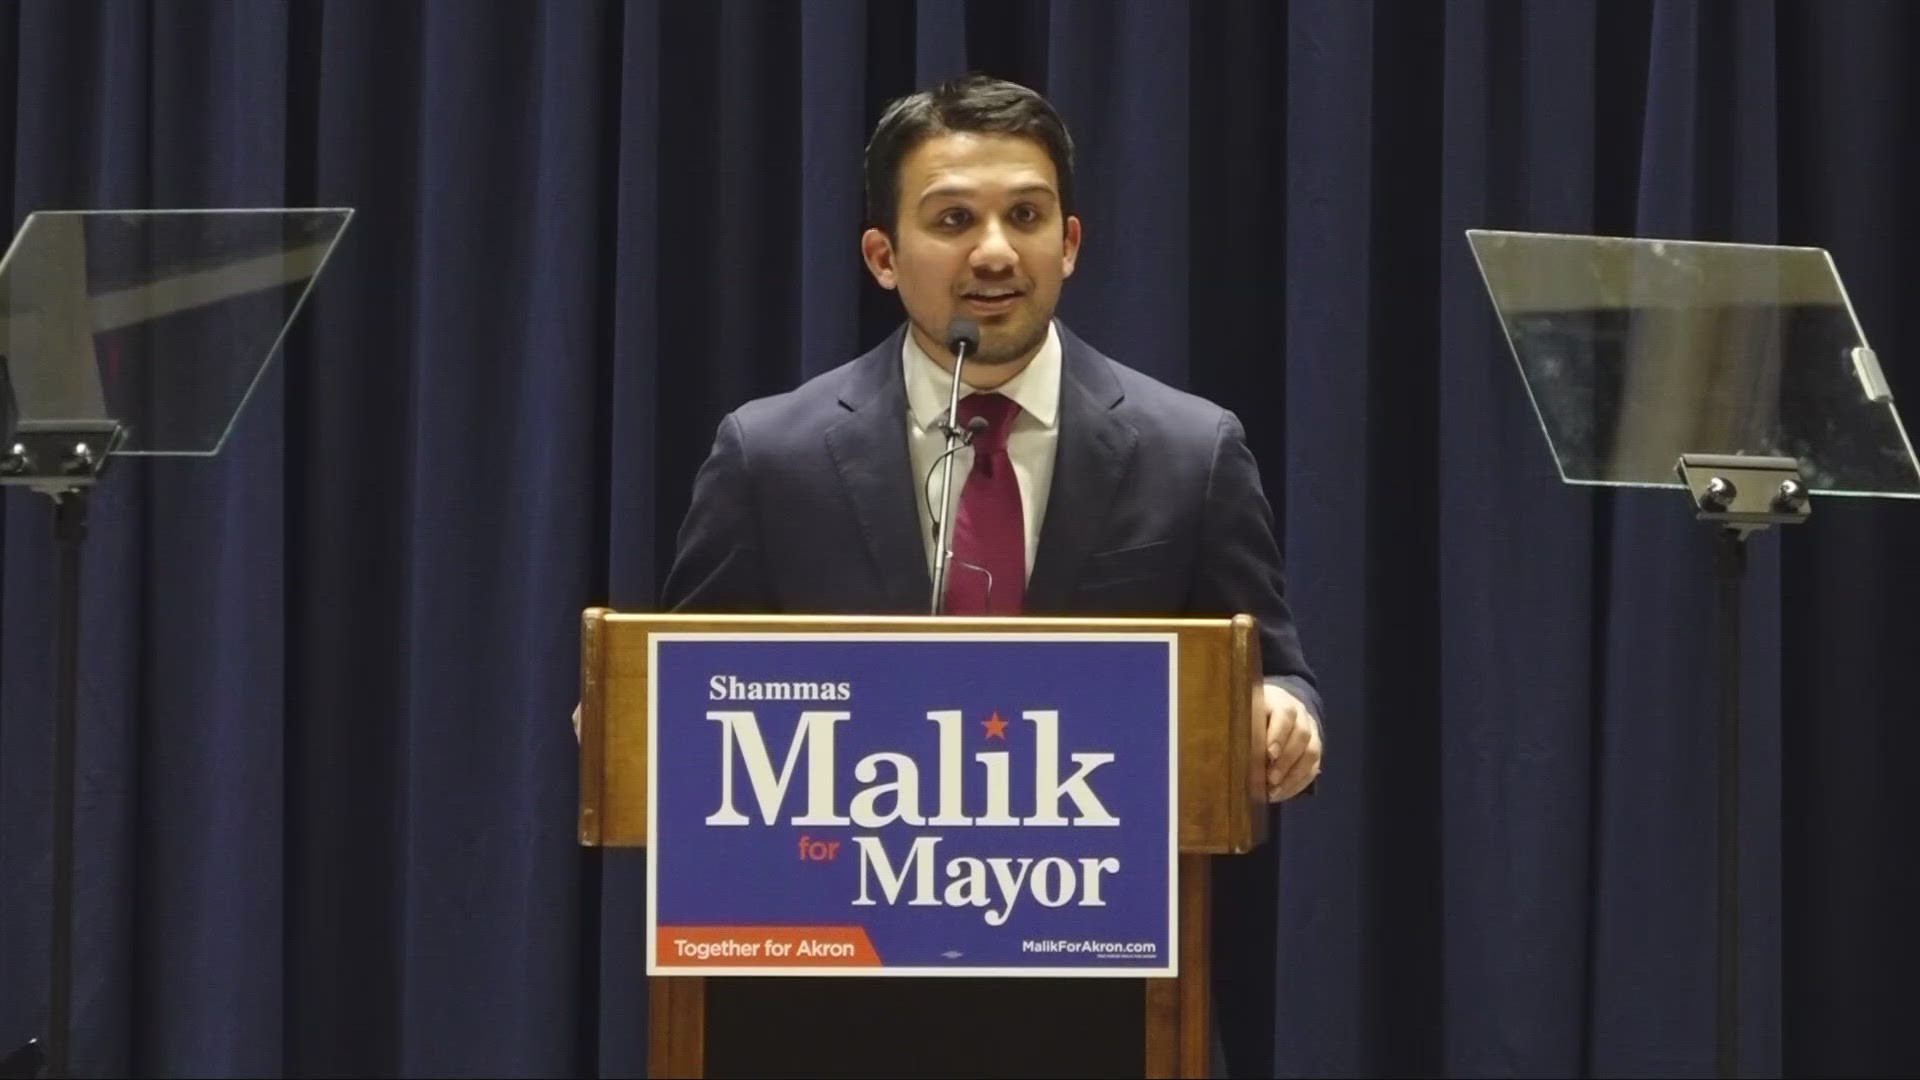 No Republicans were eligible for the primary, meaning the only way Malik will face opposition in the general election is if a candidate launches a write-in bid.